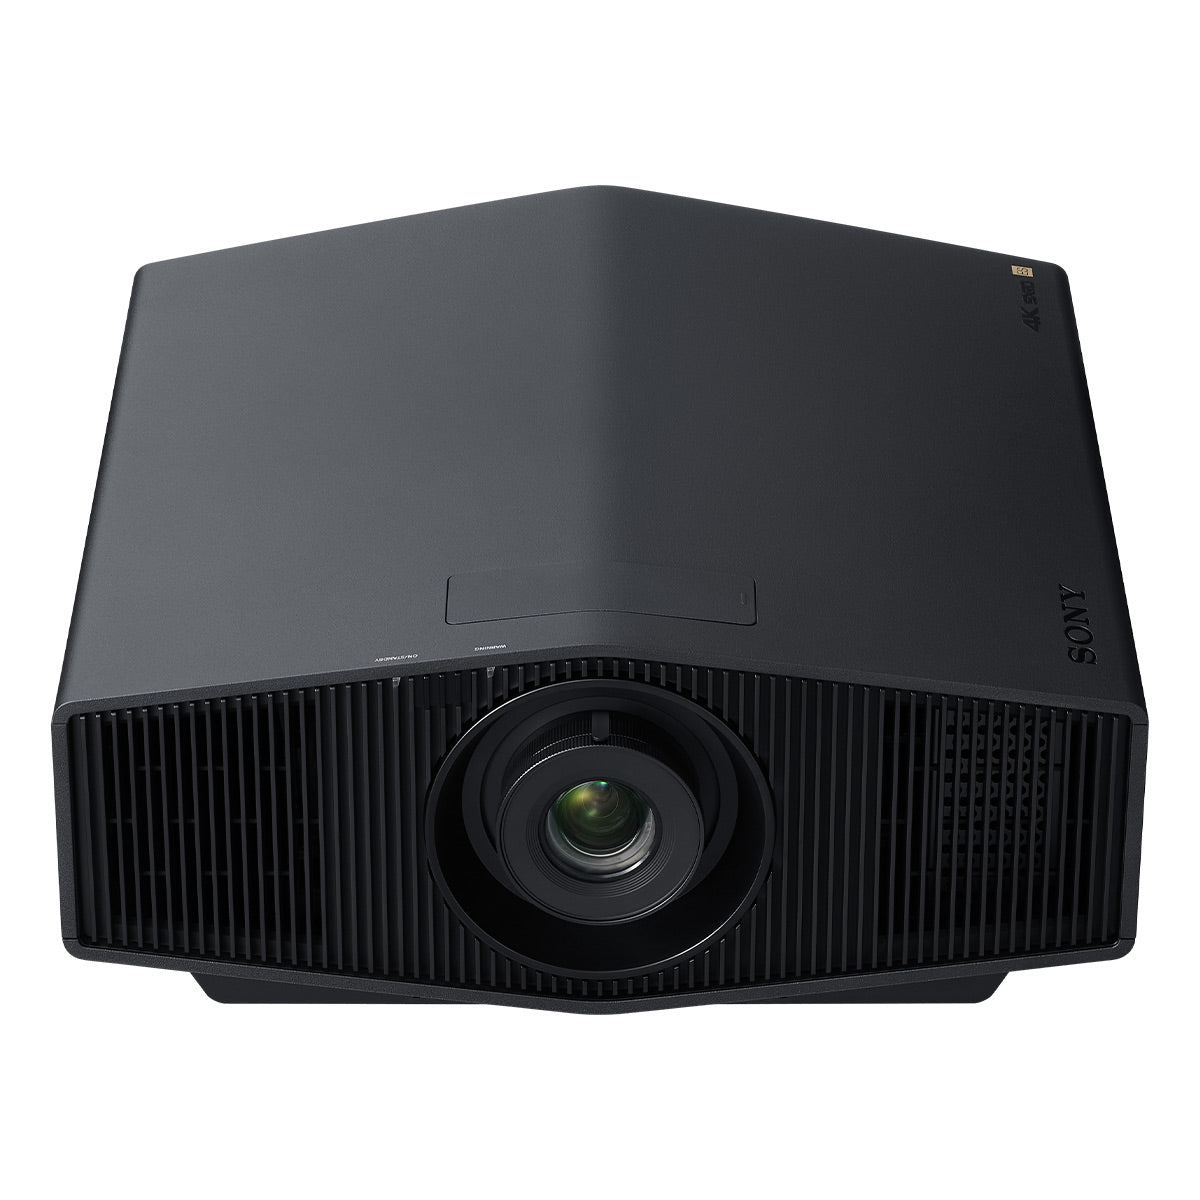 Sony VPL-XW5000ES 4K HDR Laser Home Theater Projector with Wide Dynamic Range Optics, 95% DCI-P3 Wide Color Gamut, & 2,000 Lumen Brightness (Black)